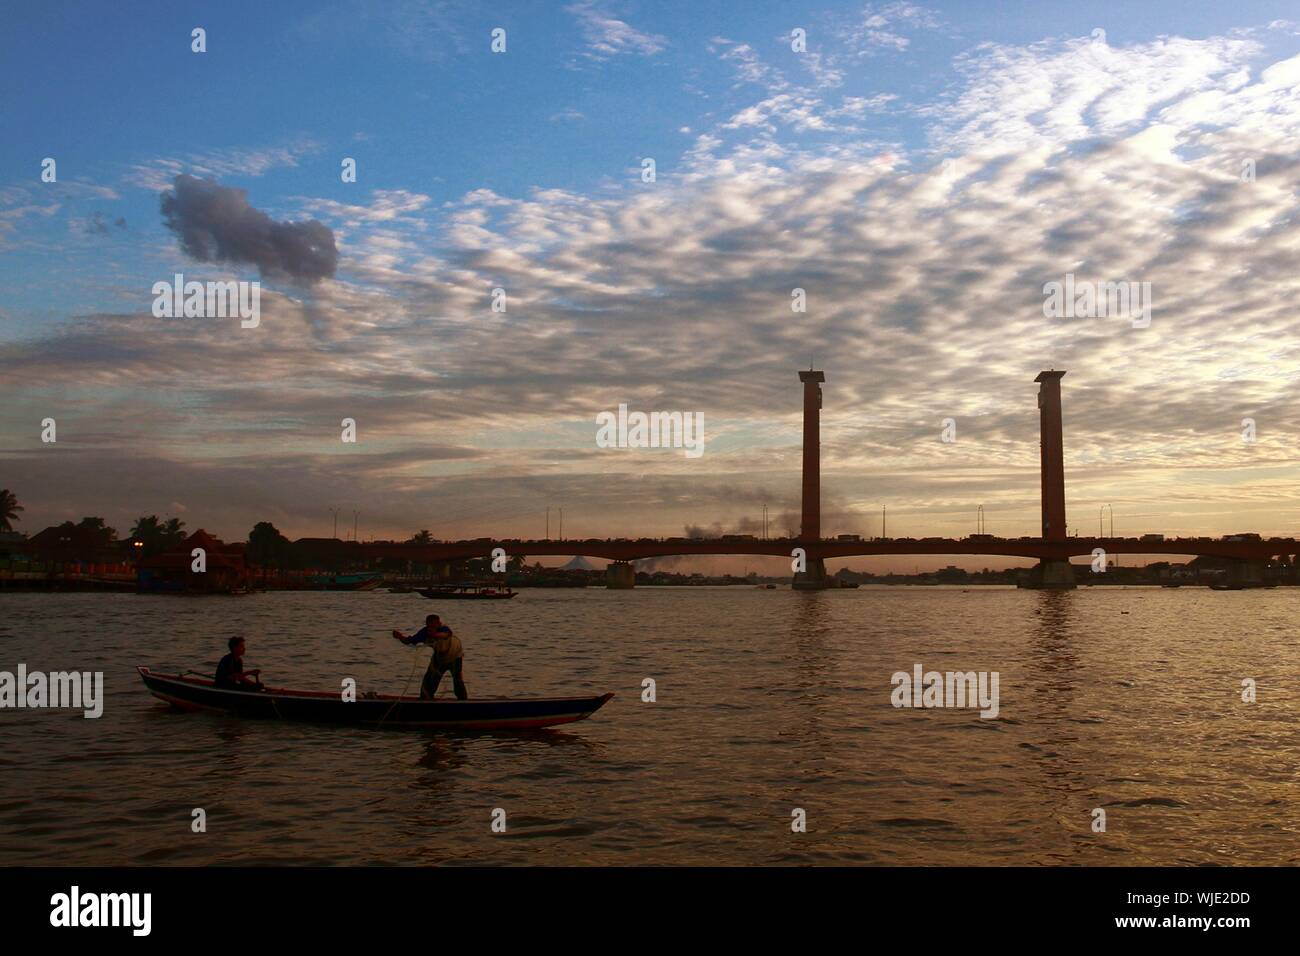 People On Boat At Musi River With Ampera Bridge In Background Stock Photo